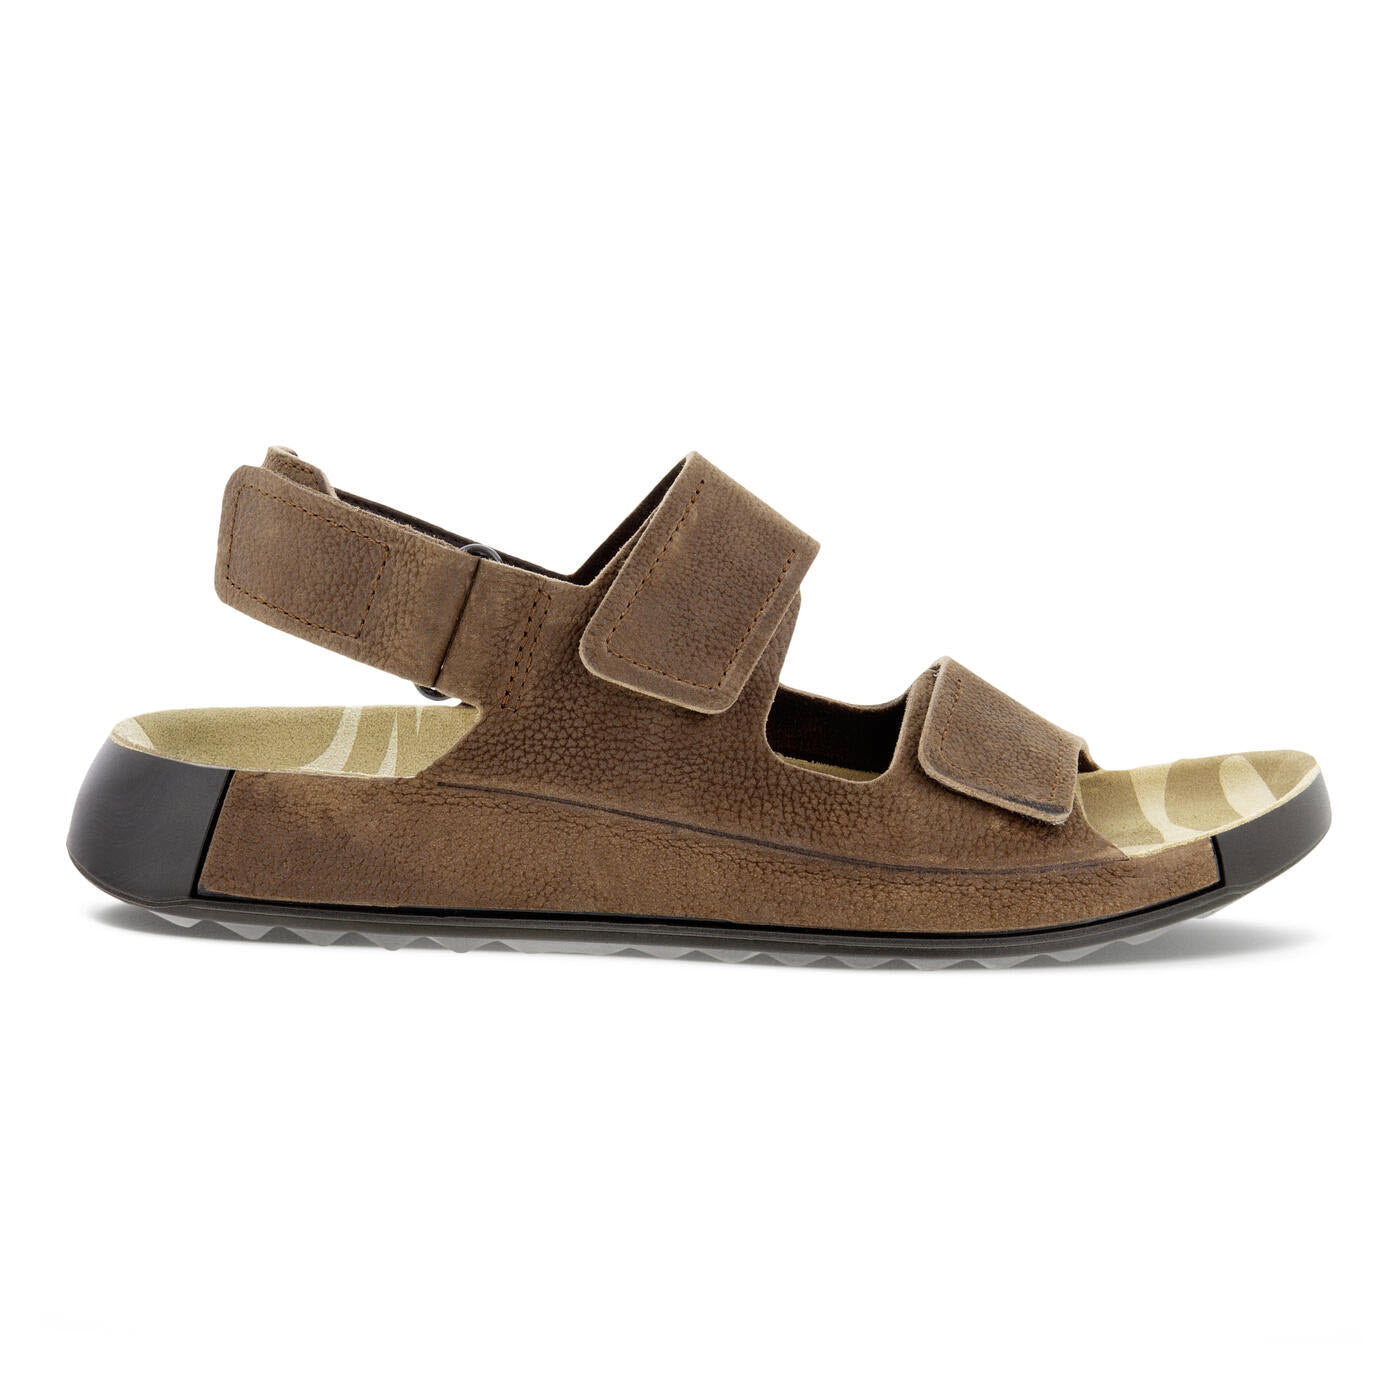 Brown ECCO 2ND COZMO 3 BAND COCOA BROWN - MENS sandal with two hook-and-loop straps and a supportive footbed, isolated on a white background.